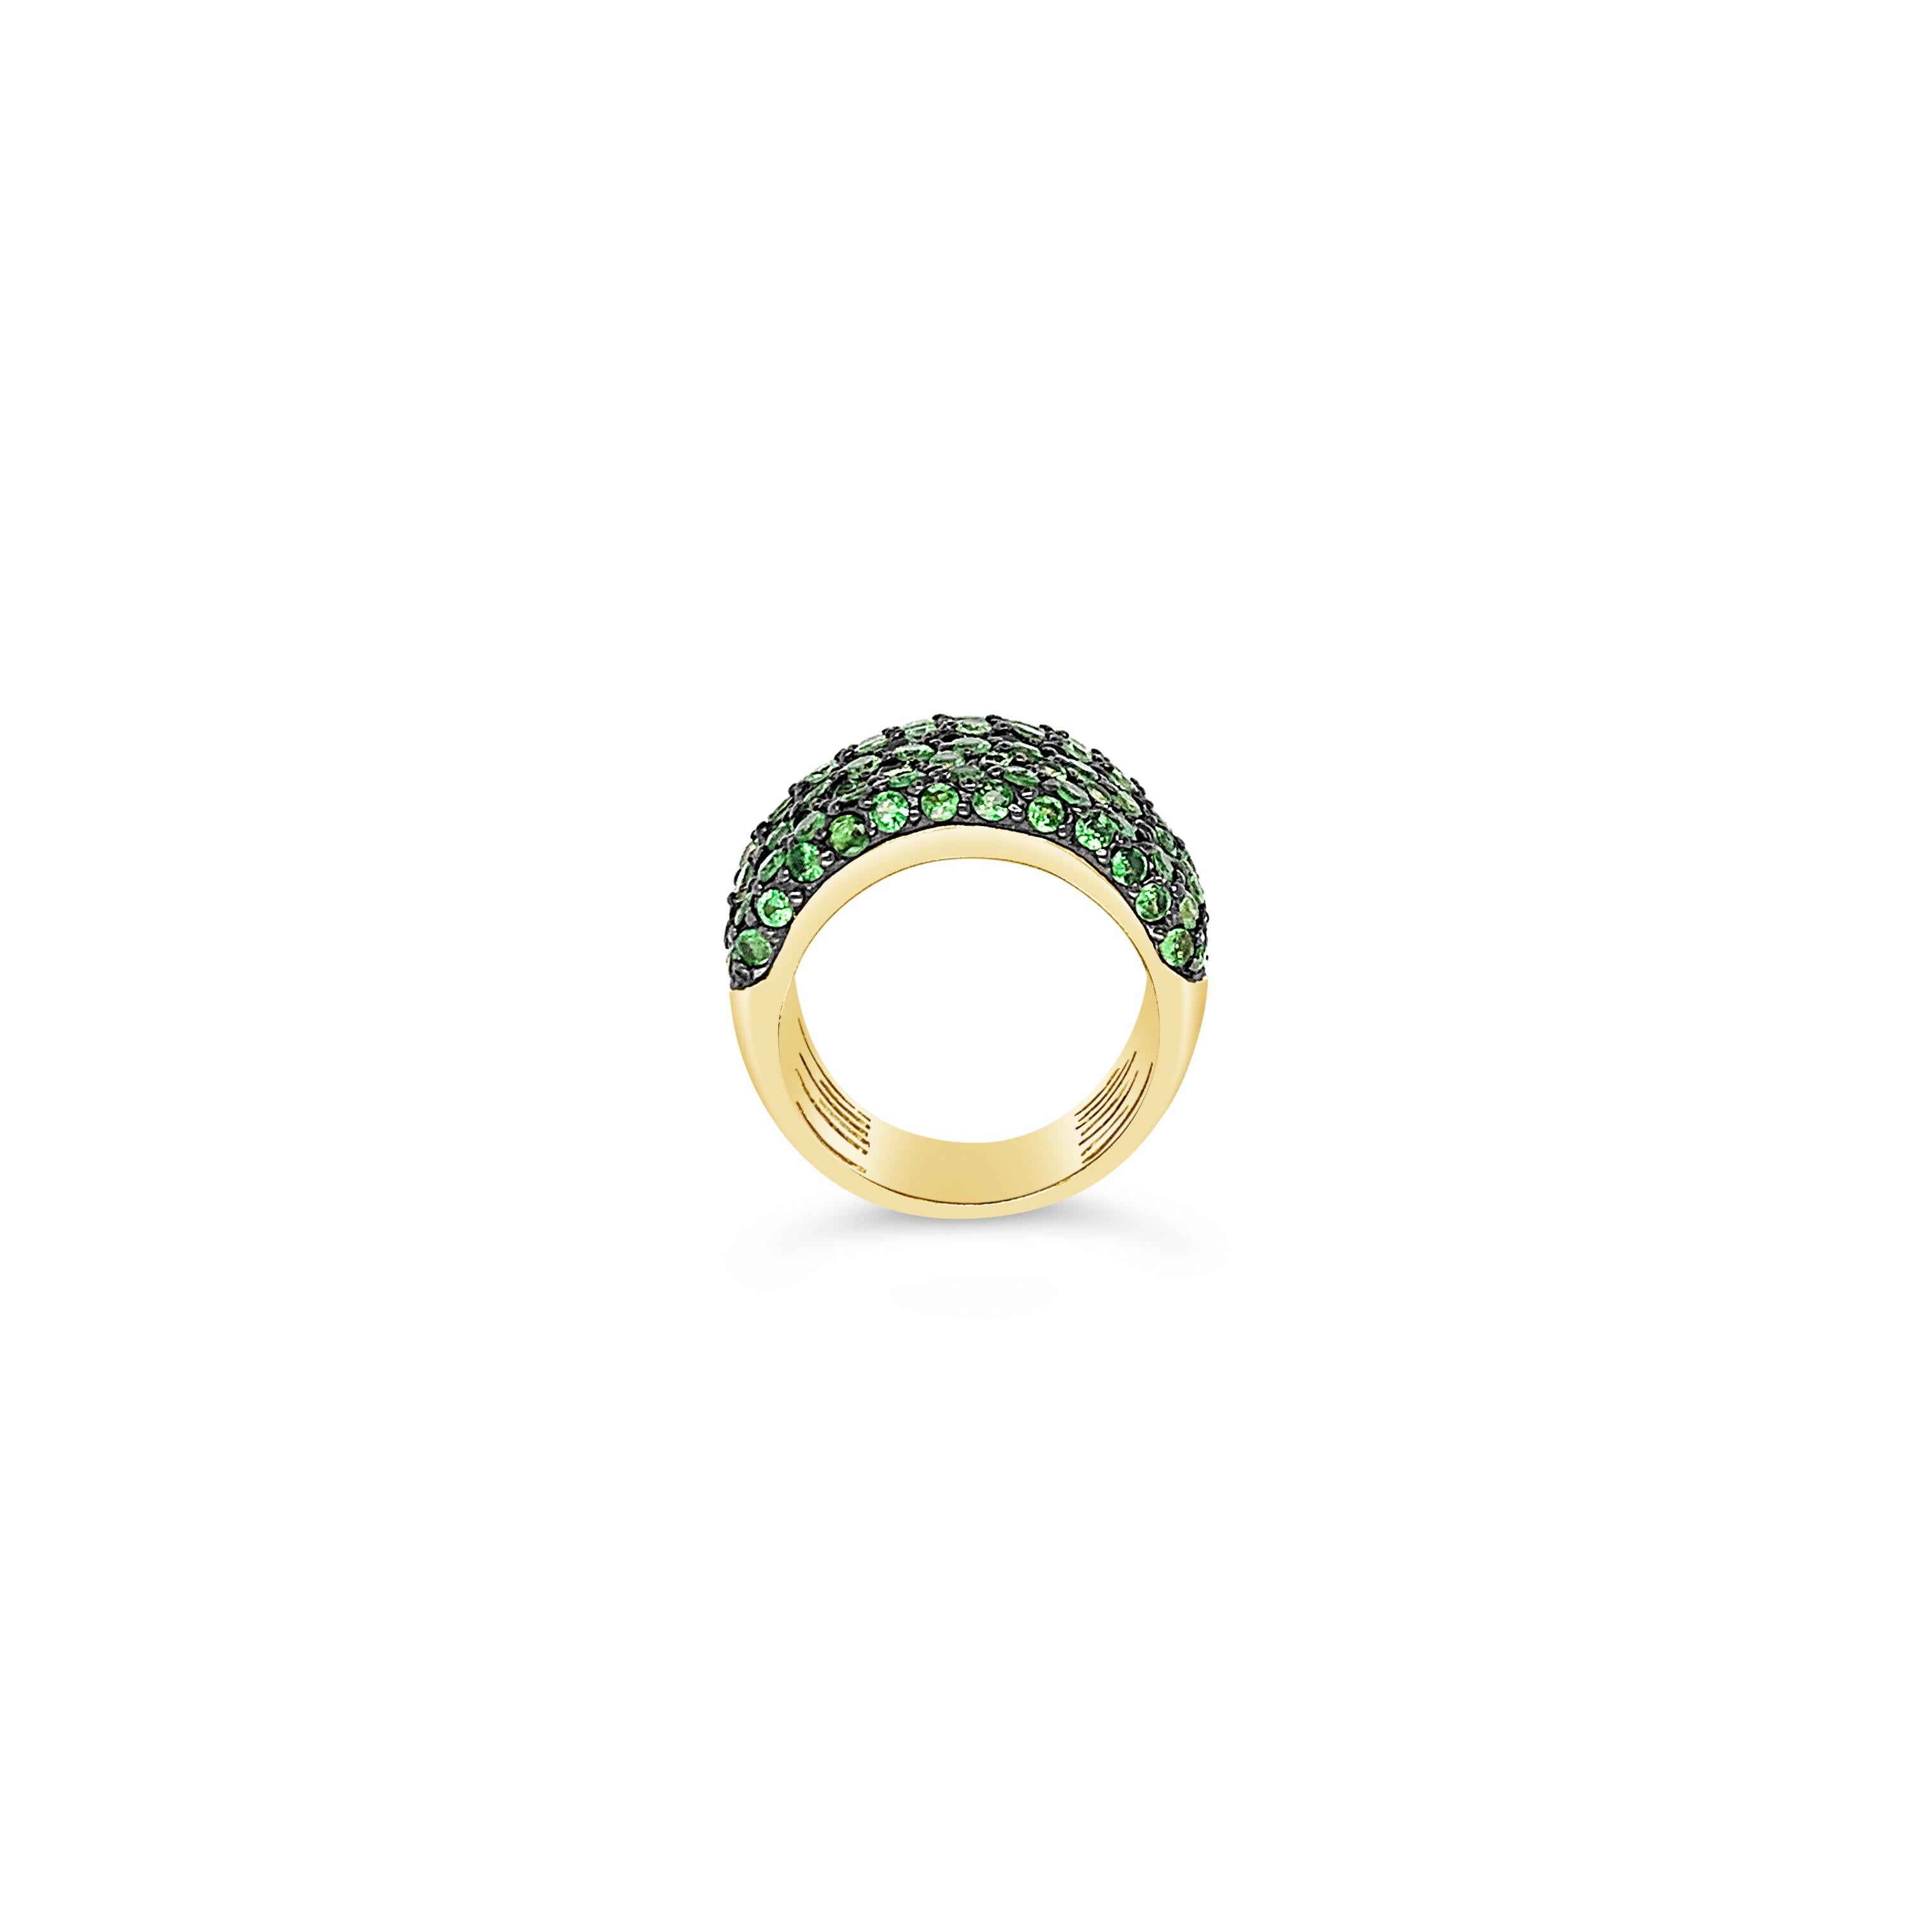 Grand Sample Sale Ring featuring 3 3/4 cts. Forest Green Tsavorite™, set in 14K Honey Gold™. Please feel free to reach out with any questions! Item comes with a Le Vian Grand Sample Sale™ jewelry box as well as a Le Vian® suede pouch! Ring Size